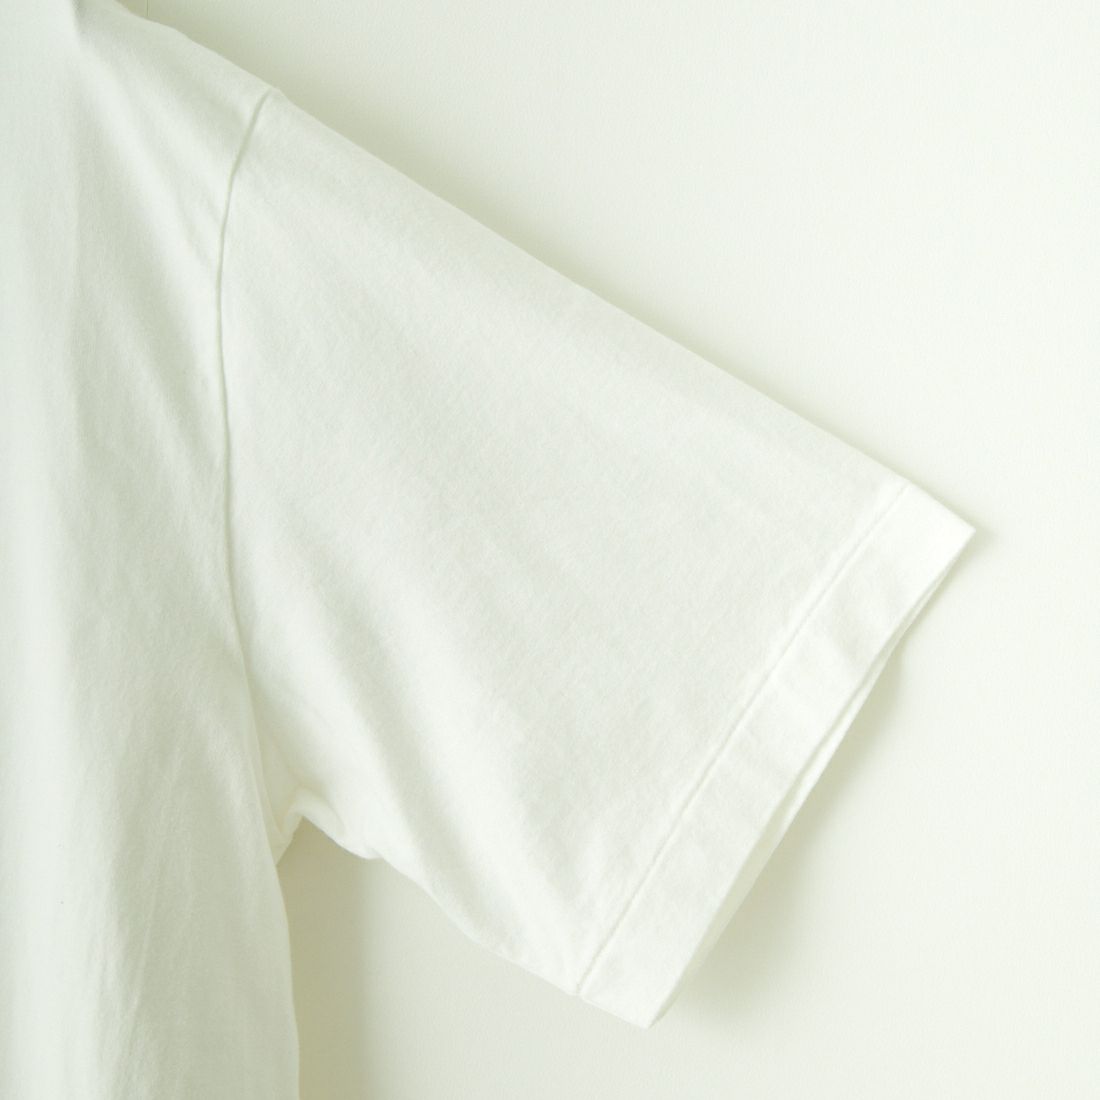 blurhms ROOTSTOCK [ブラームス ルーツストック] ワイド プリントTシャツ [BROOTS24S34C] 03 WHT/GRY